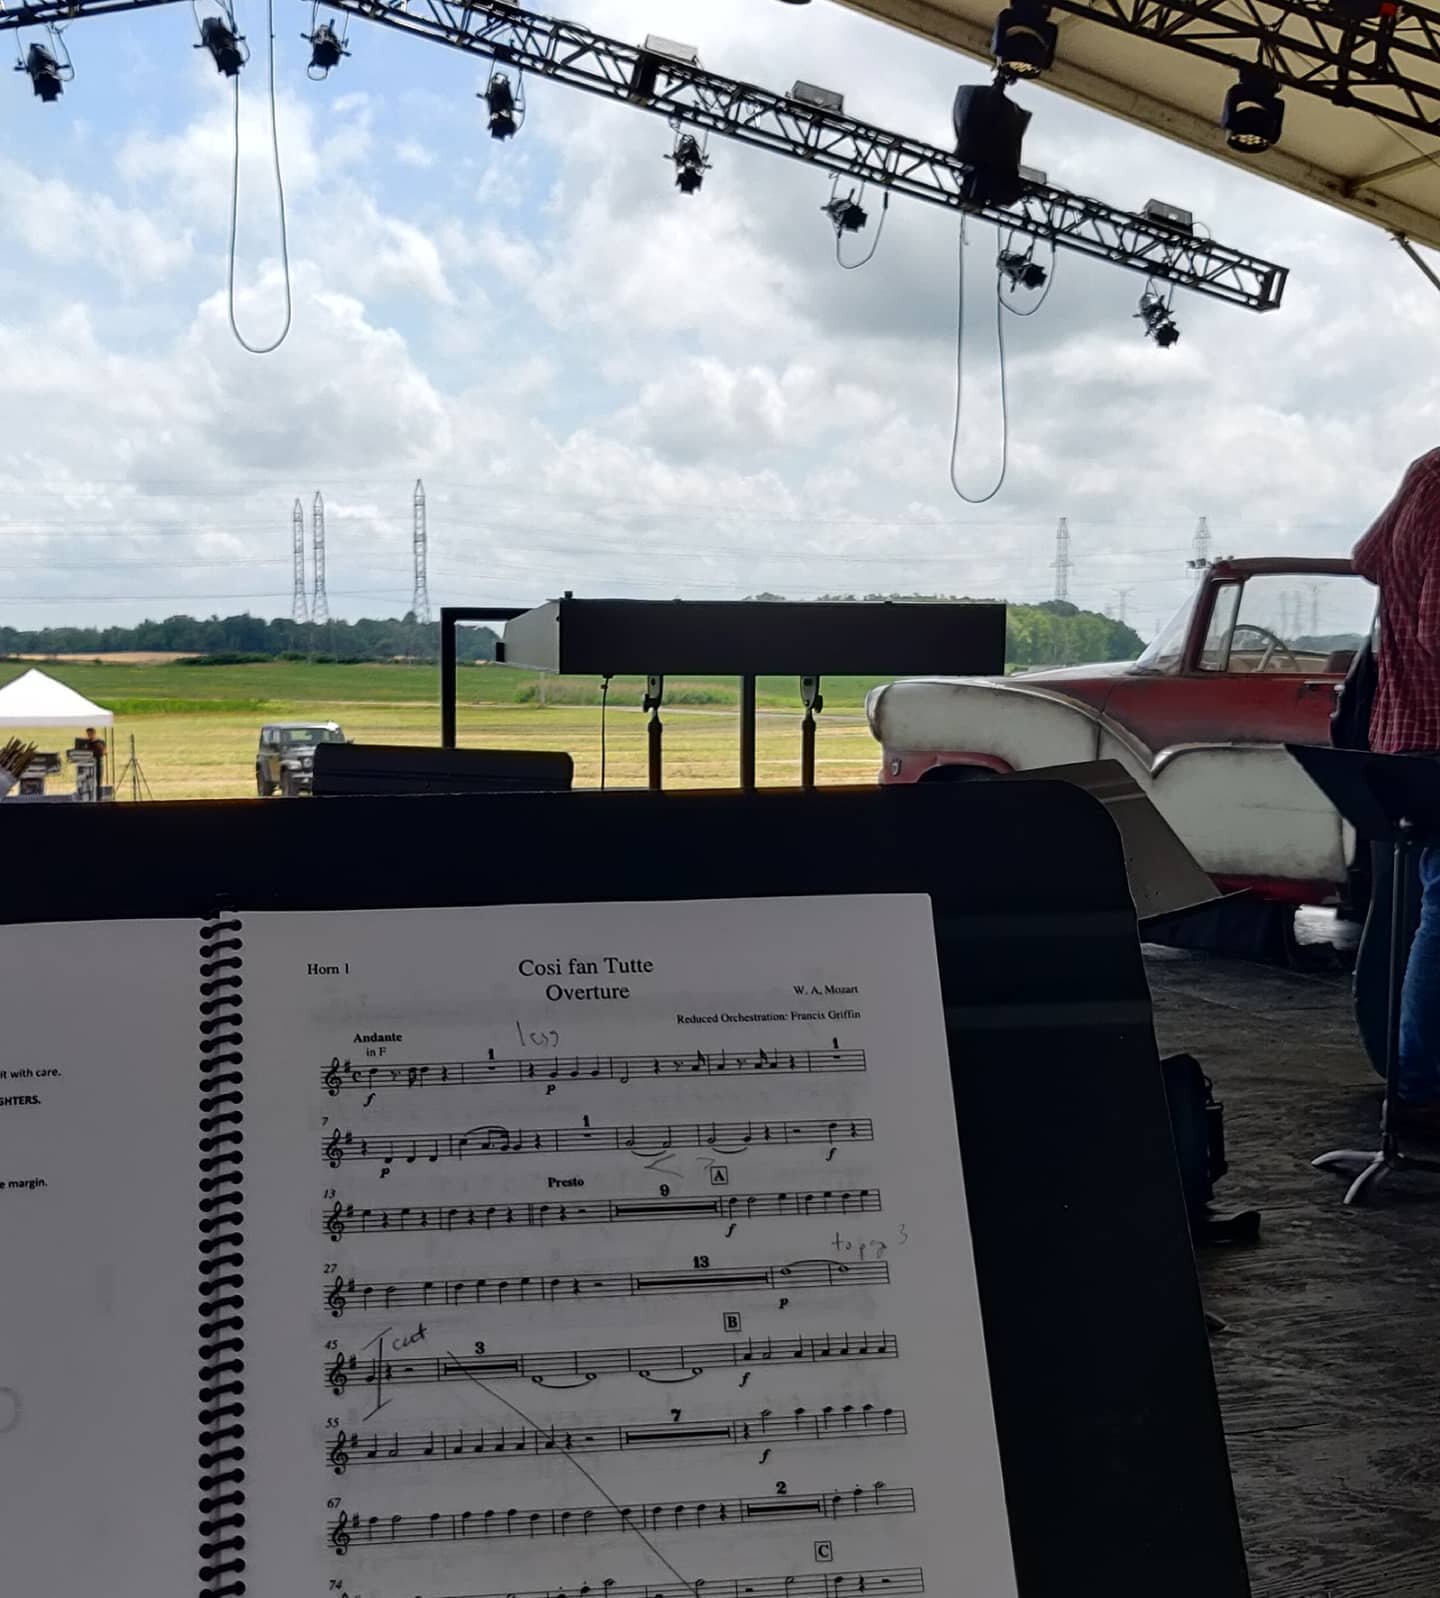 So excited to perform Cosi Fan Tutte with @brottmusicfestival tomorrow! We've got our outdoor stage ready for a very memorable drive-in themed drive-in concert! 😁

#nationalacademyorchestra #nationalacademyorchestraofcanada #brottmusicfestival #oper